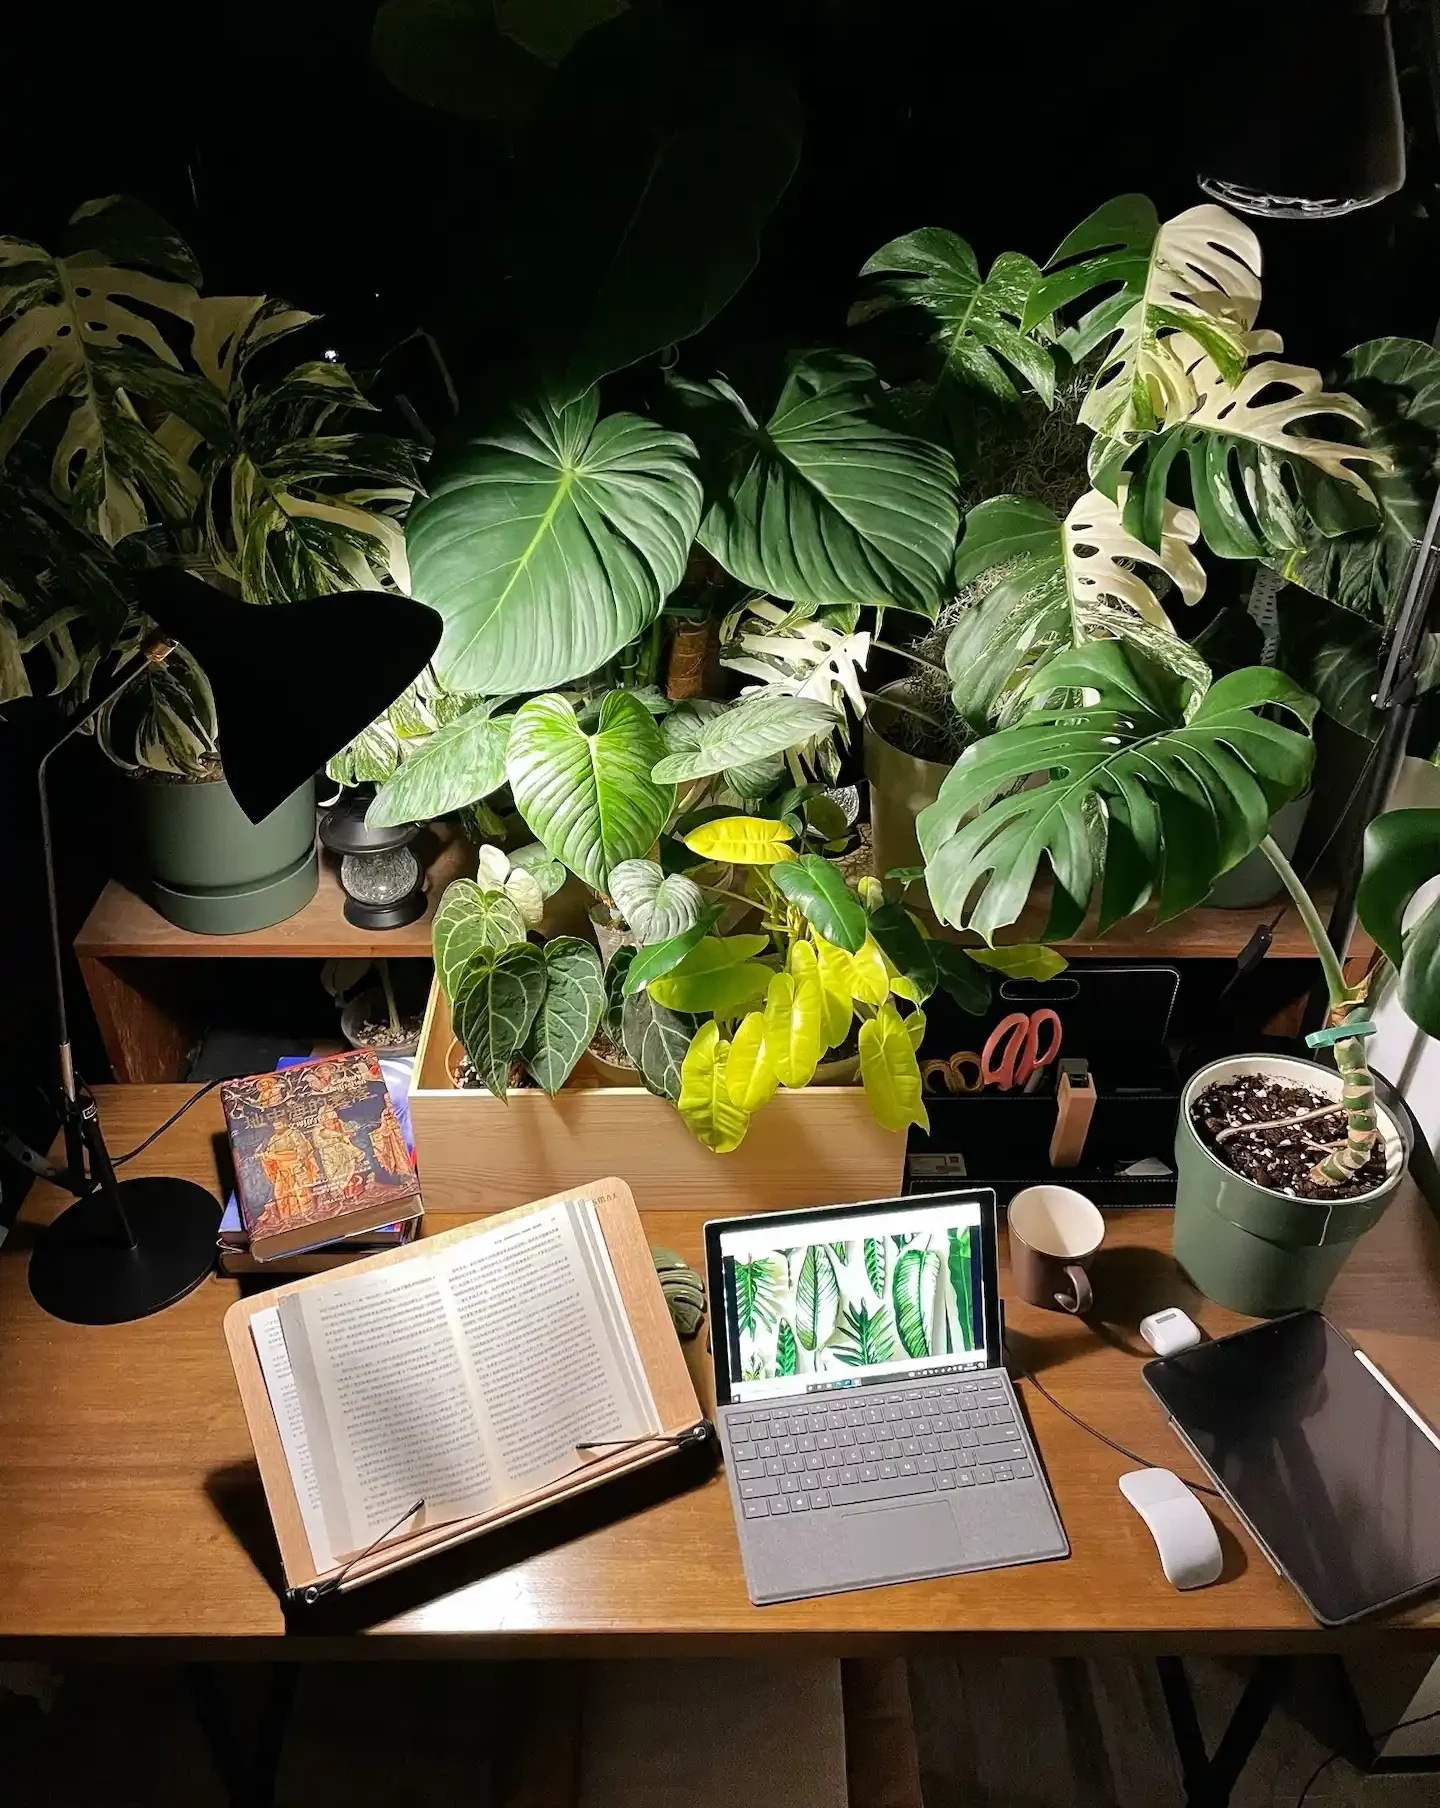 An intimate night-time reading corner with an open book on a wooden desk, flanked by an illuminated laptop displaying leafy plants and various potted plants in the background.